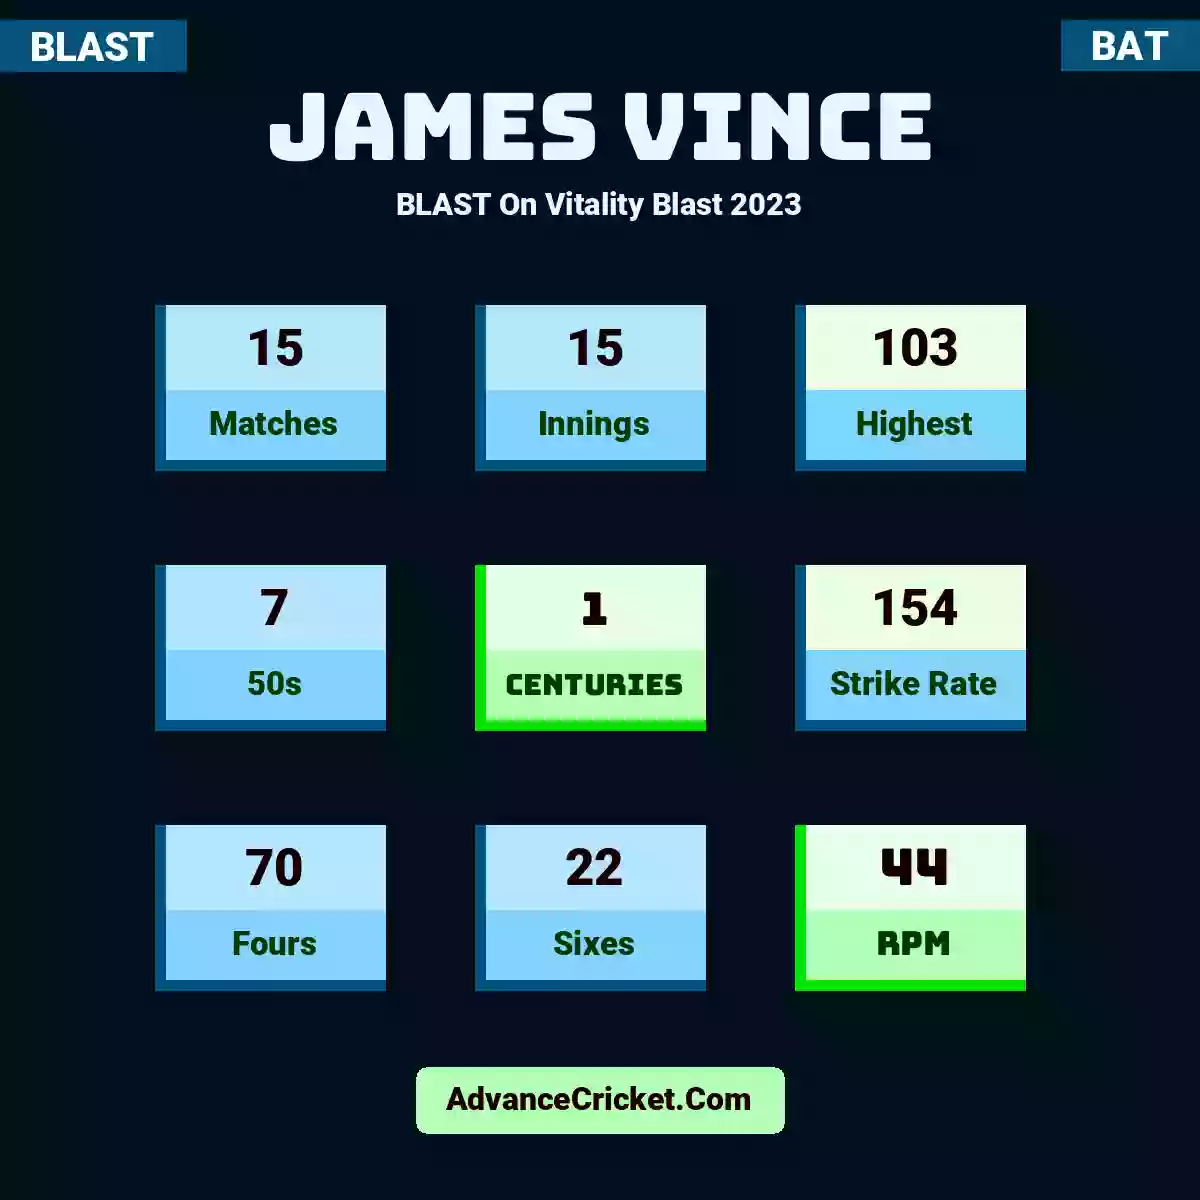 James Vince BLAST  On Vitality Blast 2023, James Vince played 15 matches, scored 103 runs as highest, 7 half-centuries, and 1 centuries, with a strike rate of 154. J.Vince hit 70 fours and 22 sixes, with an RPM of 44.